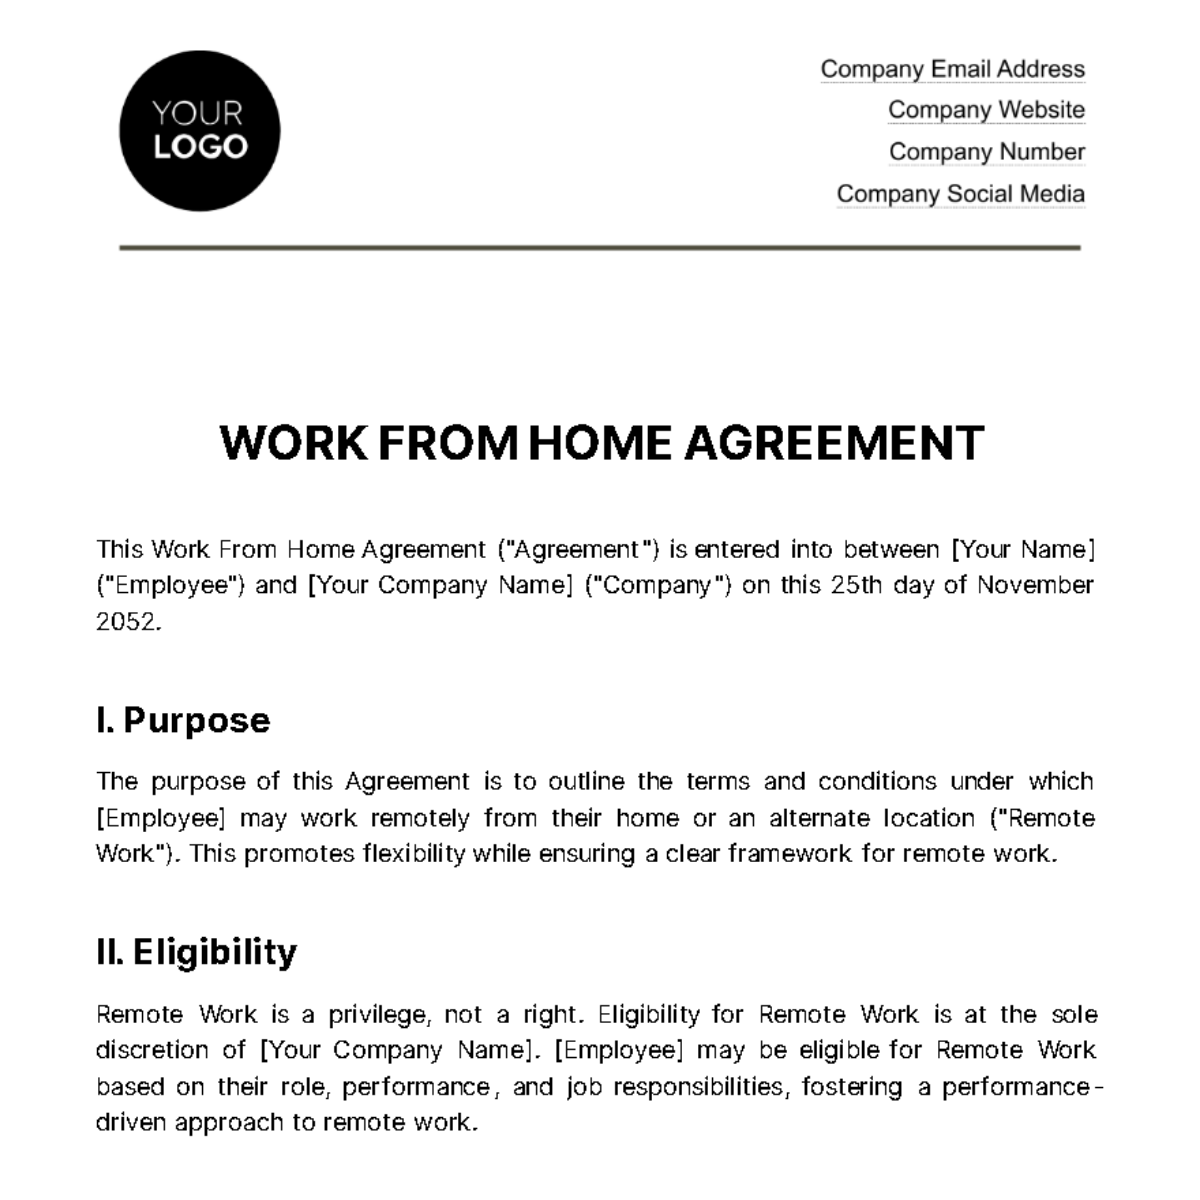 Work From Home Agreement HR Template